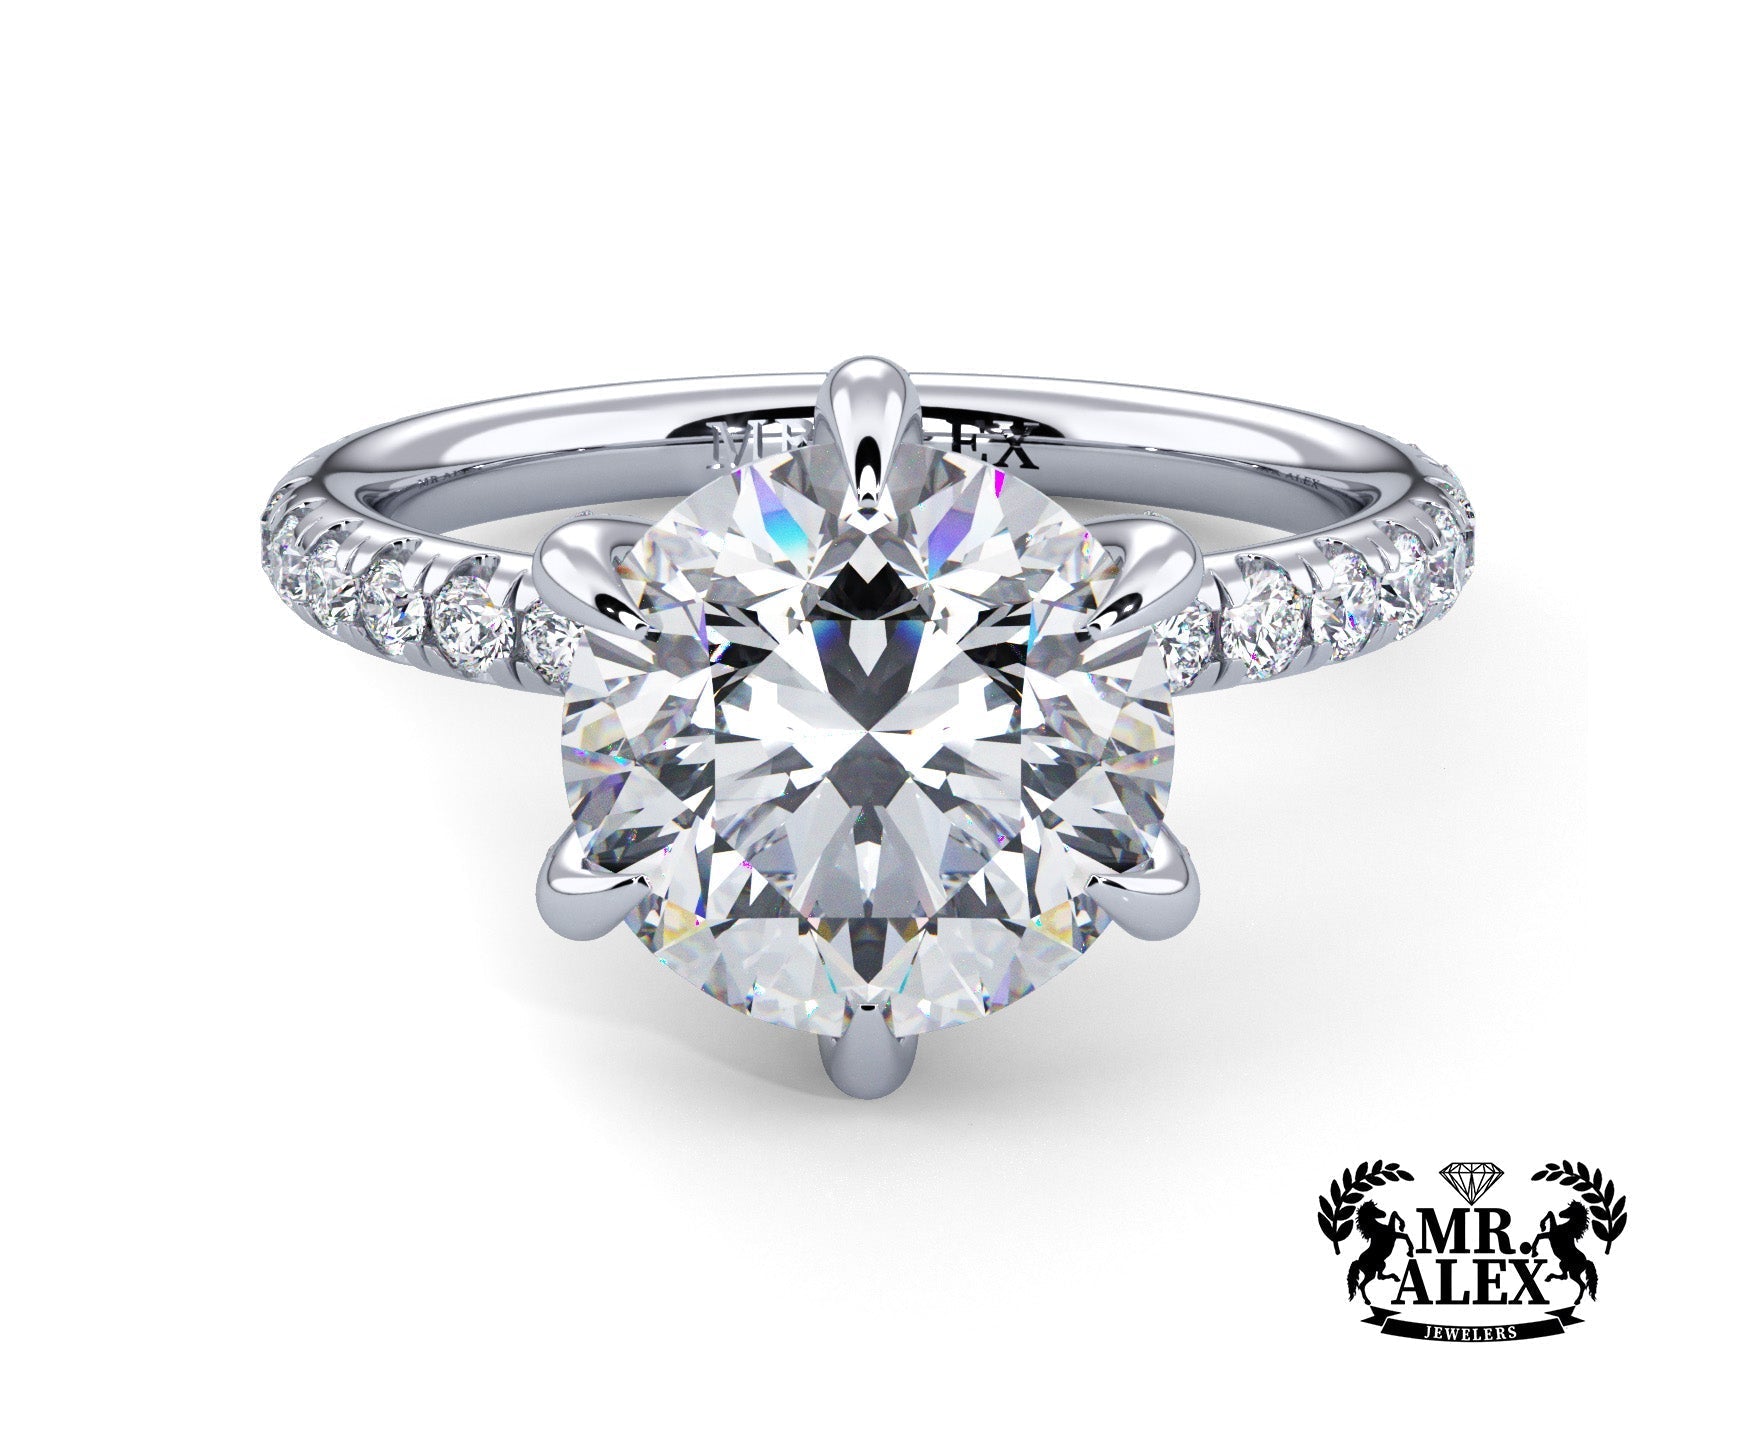 Engagement Rings - Mr. Alex Jewelry